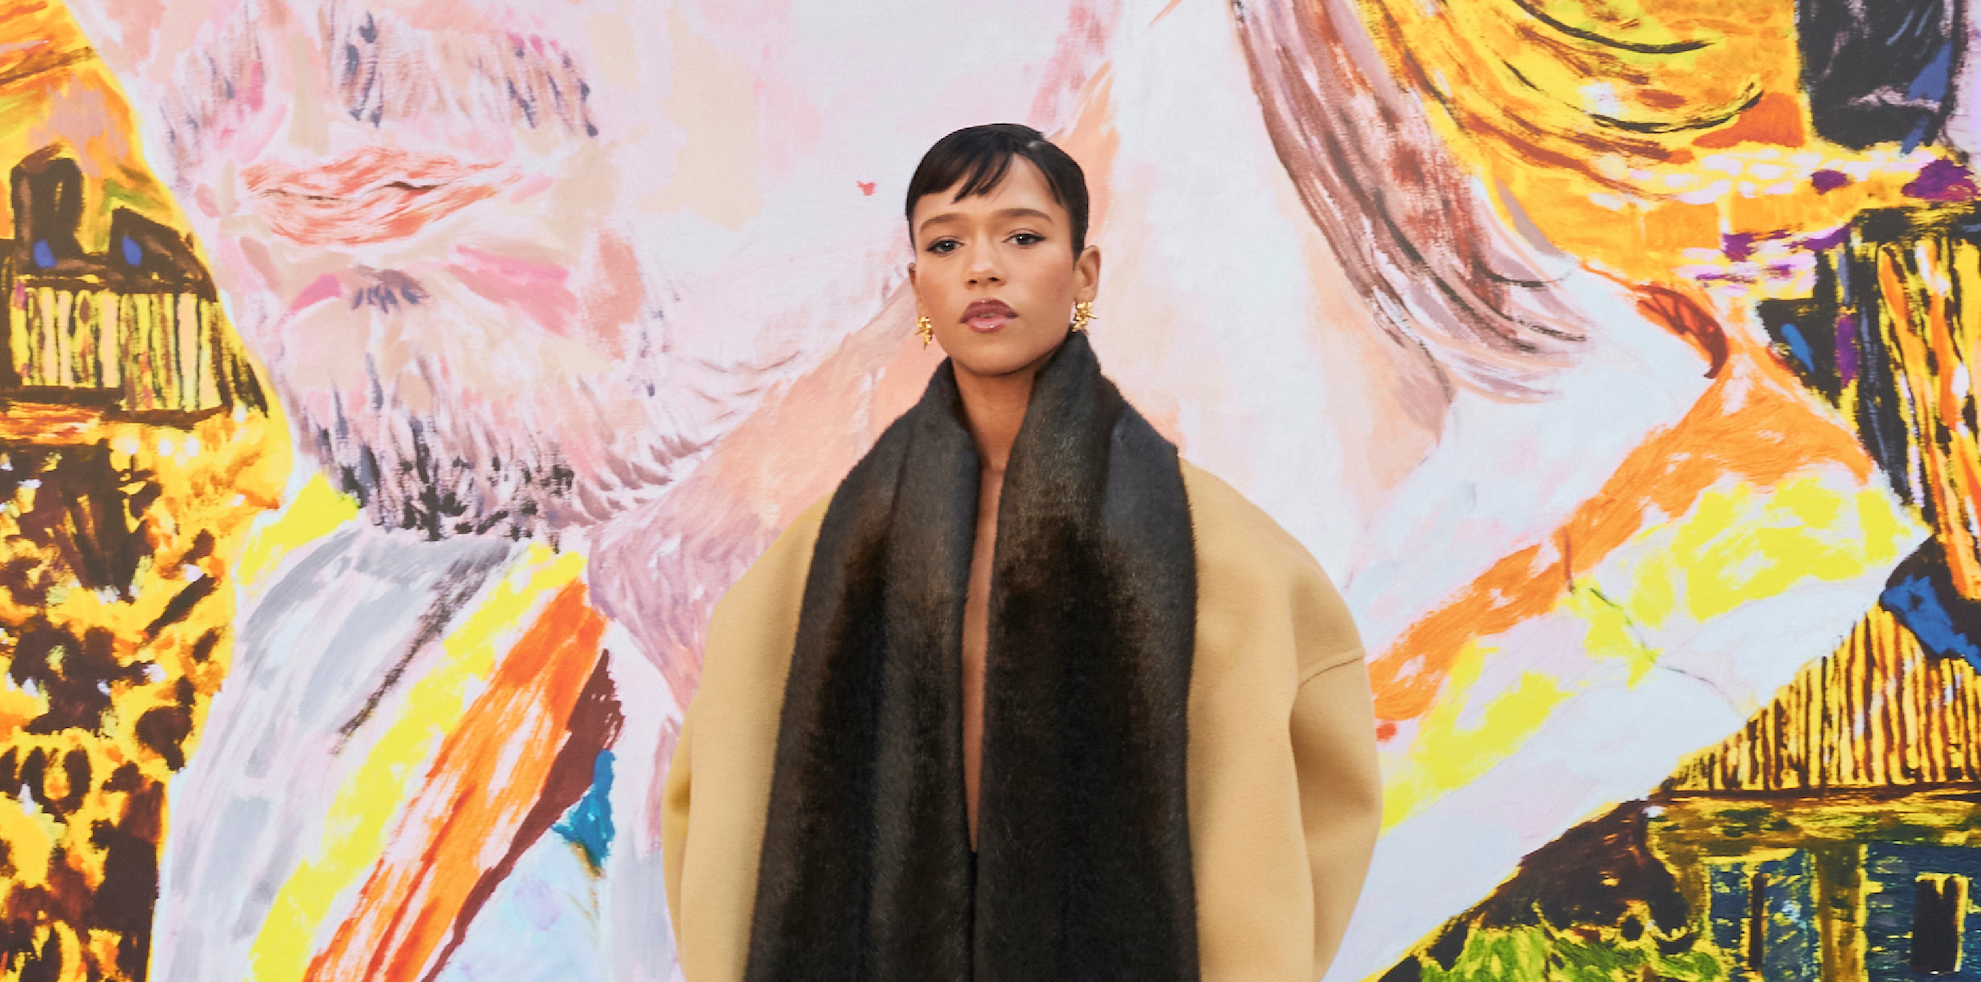 Actress Taylor Russell at LOEWE FW24 Men's Show, enveloped in a luxurious camel coat with a striking black scarf, against an abstract art backdrop.